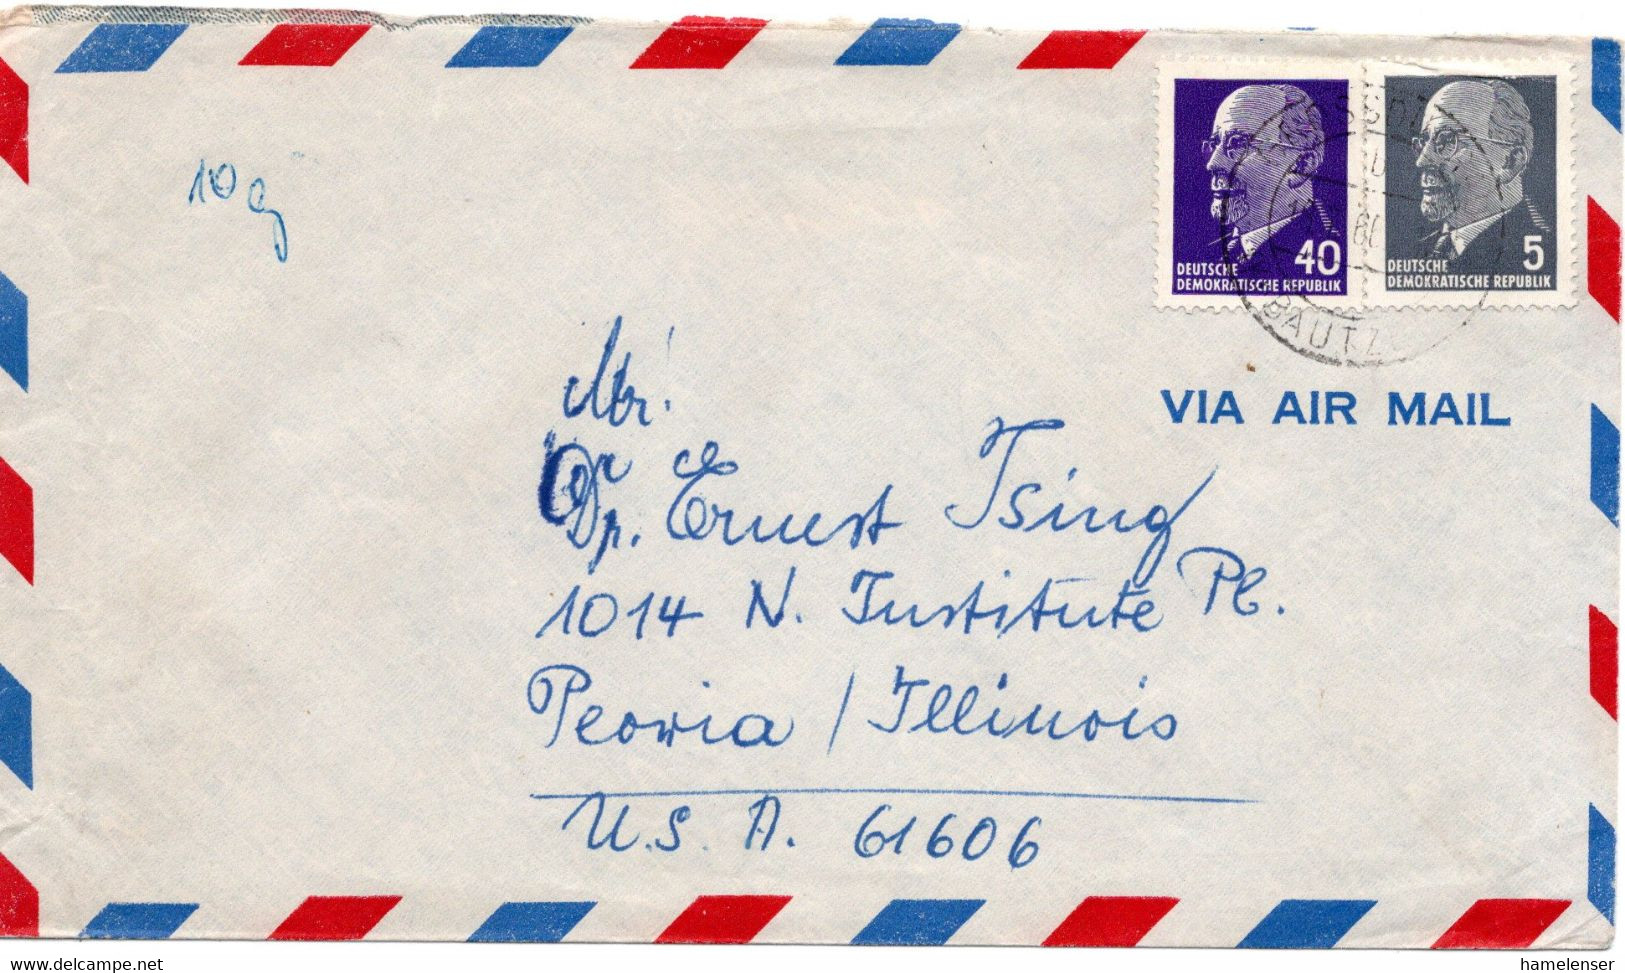 55643 - DDR - 1966 - 40Pfg. Ulbricht MiF A. LpBf. GROSSDUBROW -> Peoria, IL (USA) - Covers & Documents